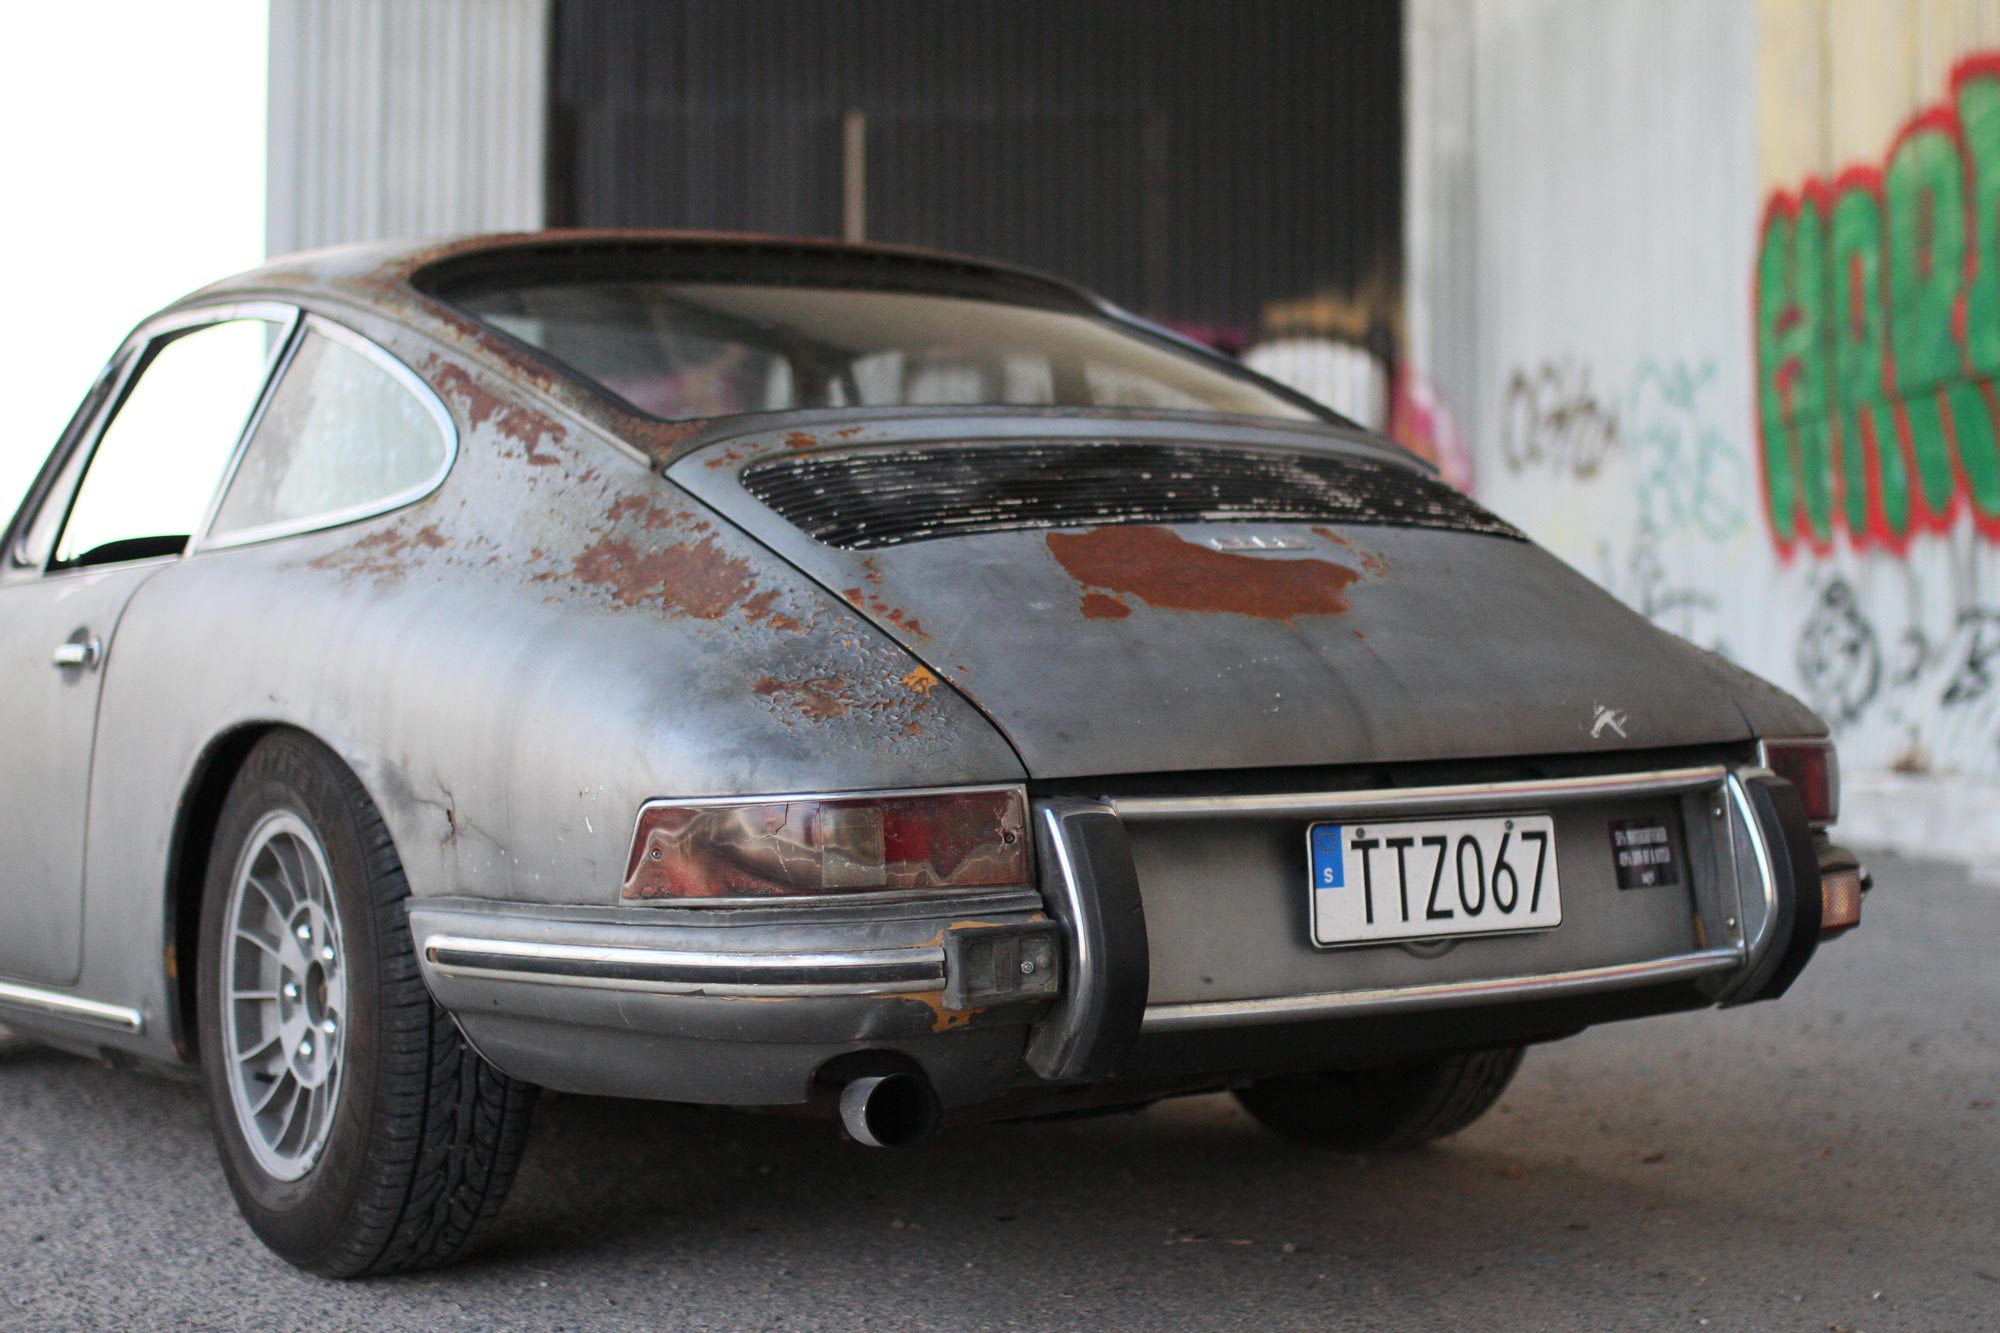 Porsche 912 with a patina touch, direct from San Fransisco. 